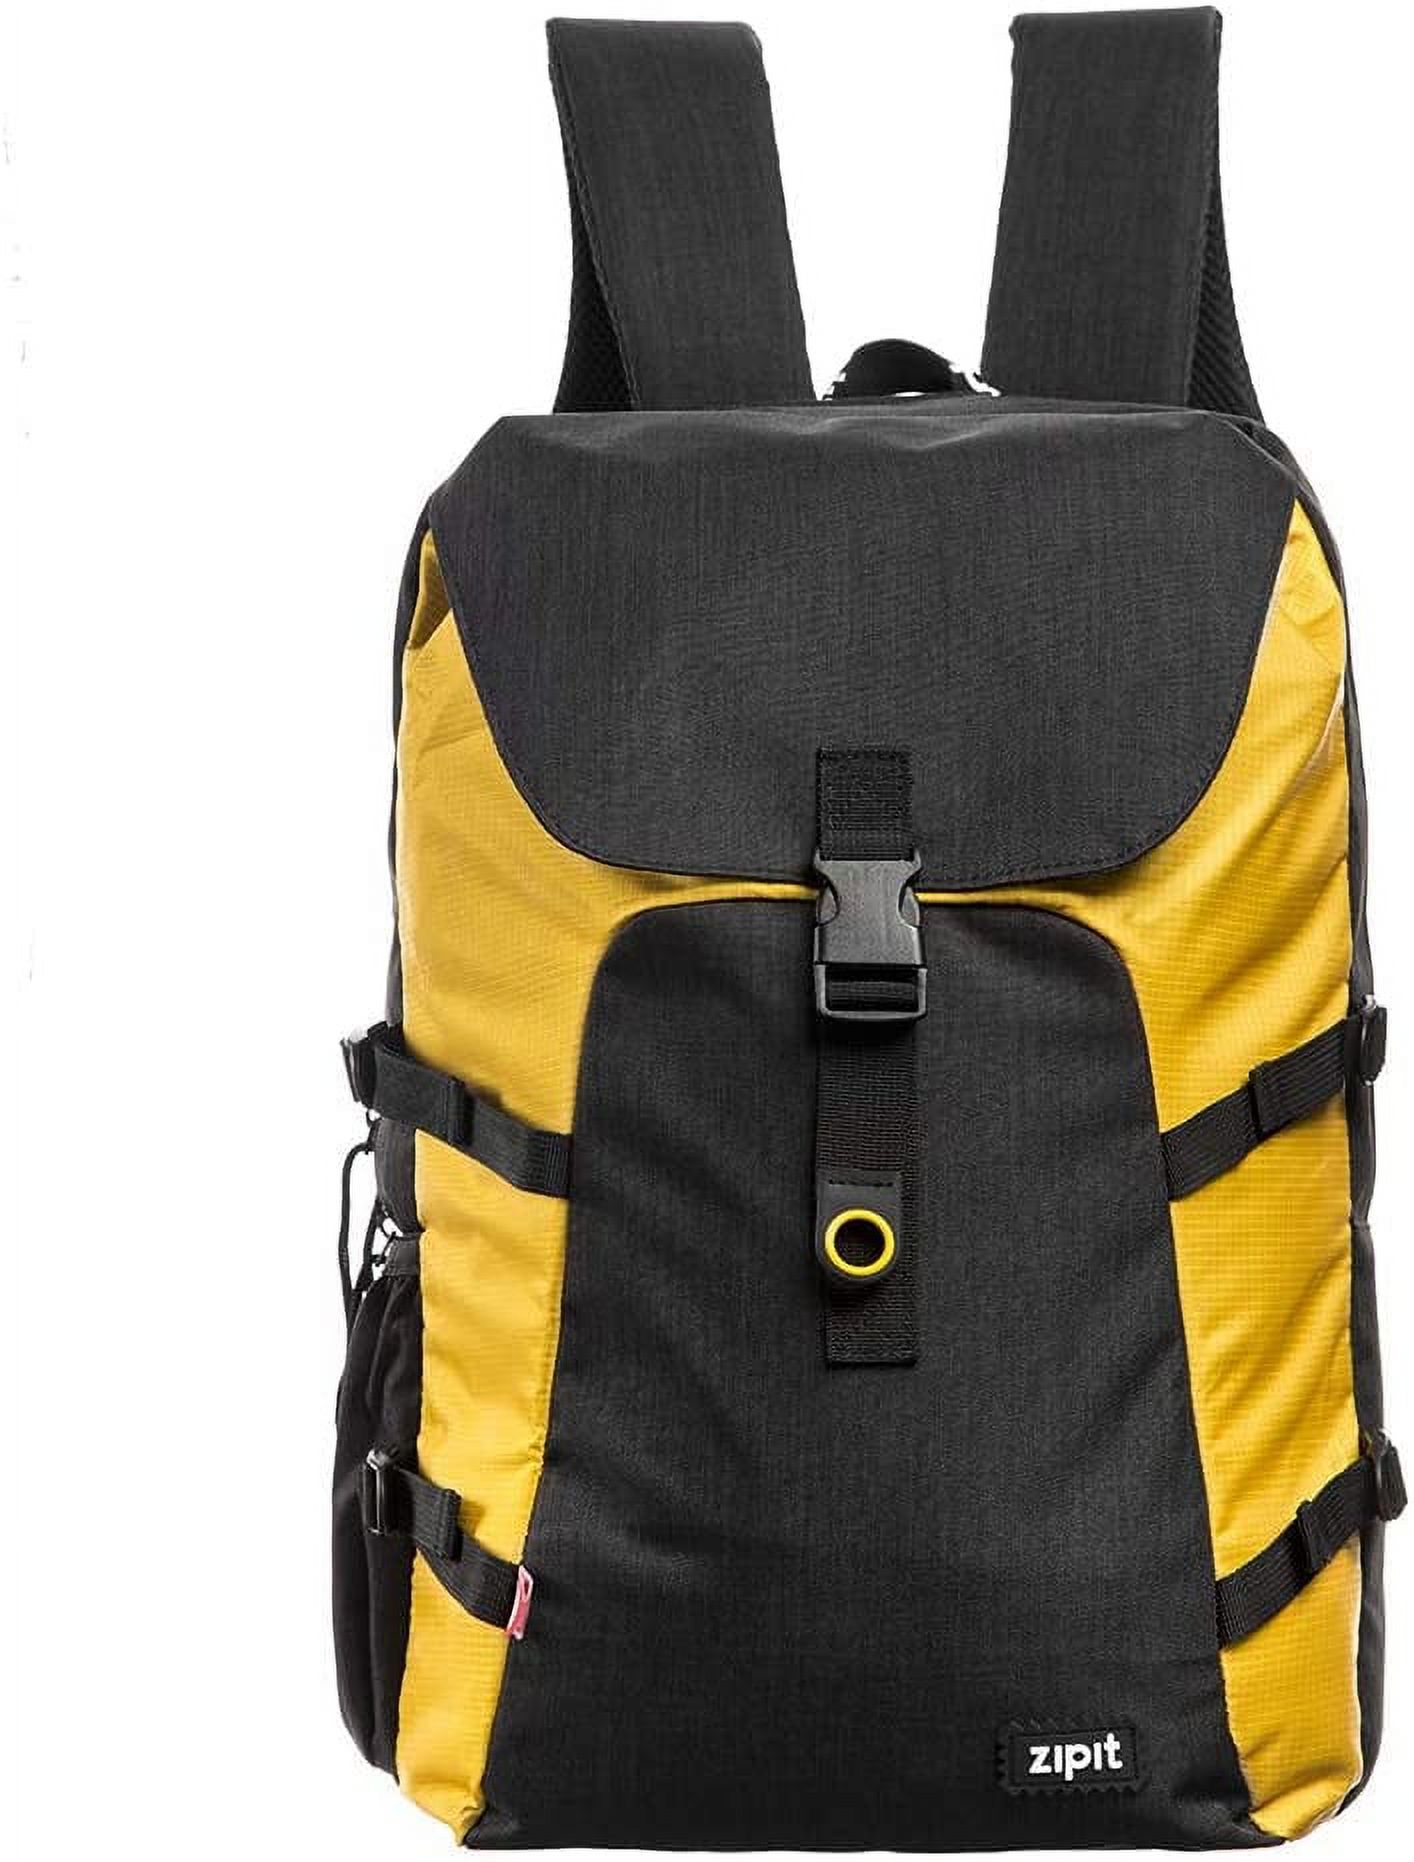 ZIPIT Metro Backpack, High School and College Bag, Padded Laptop Compartment, Sturdy and Lightweight (Black & Yellow) - image 1 of 10